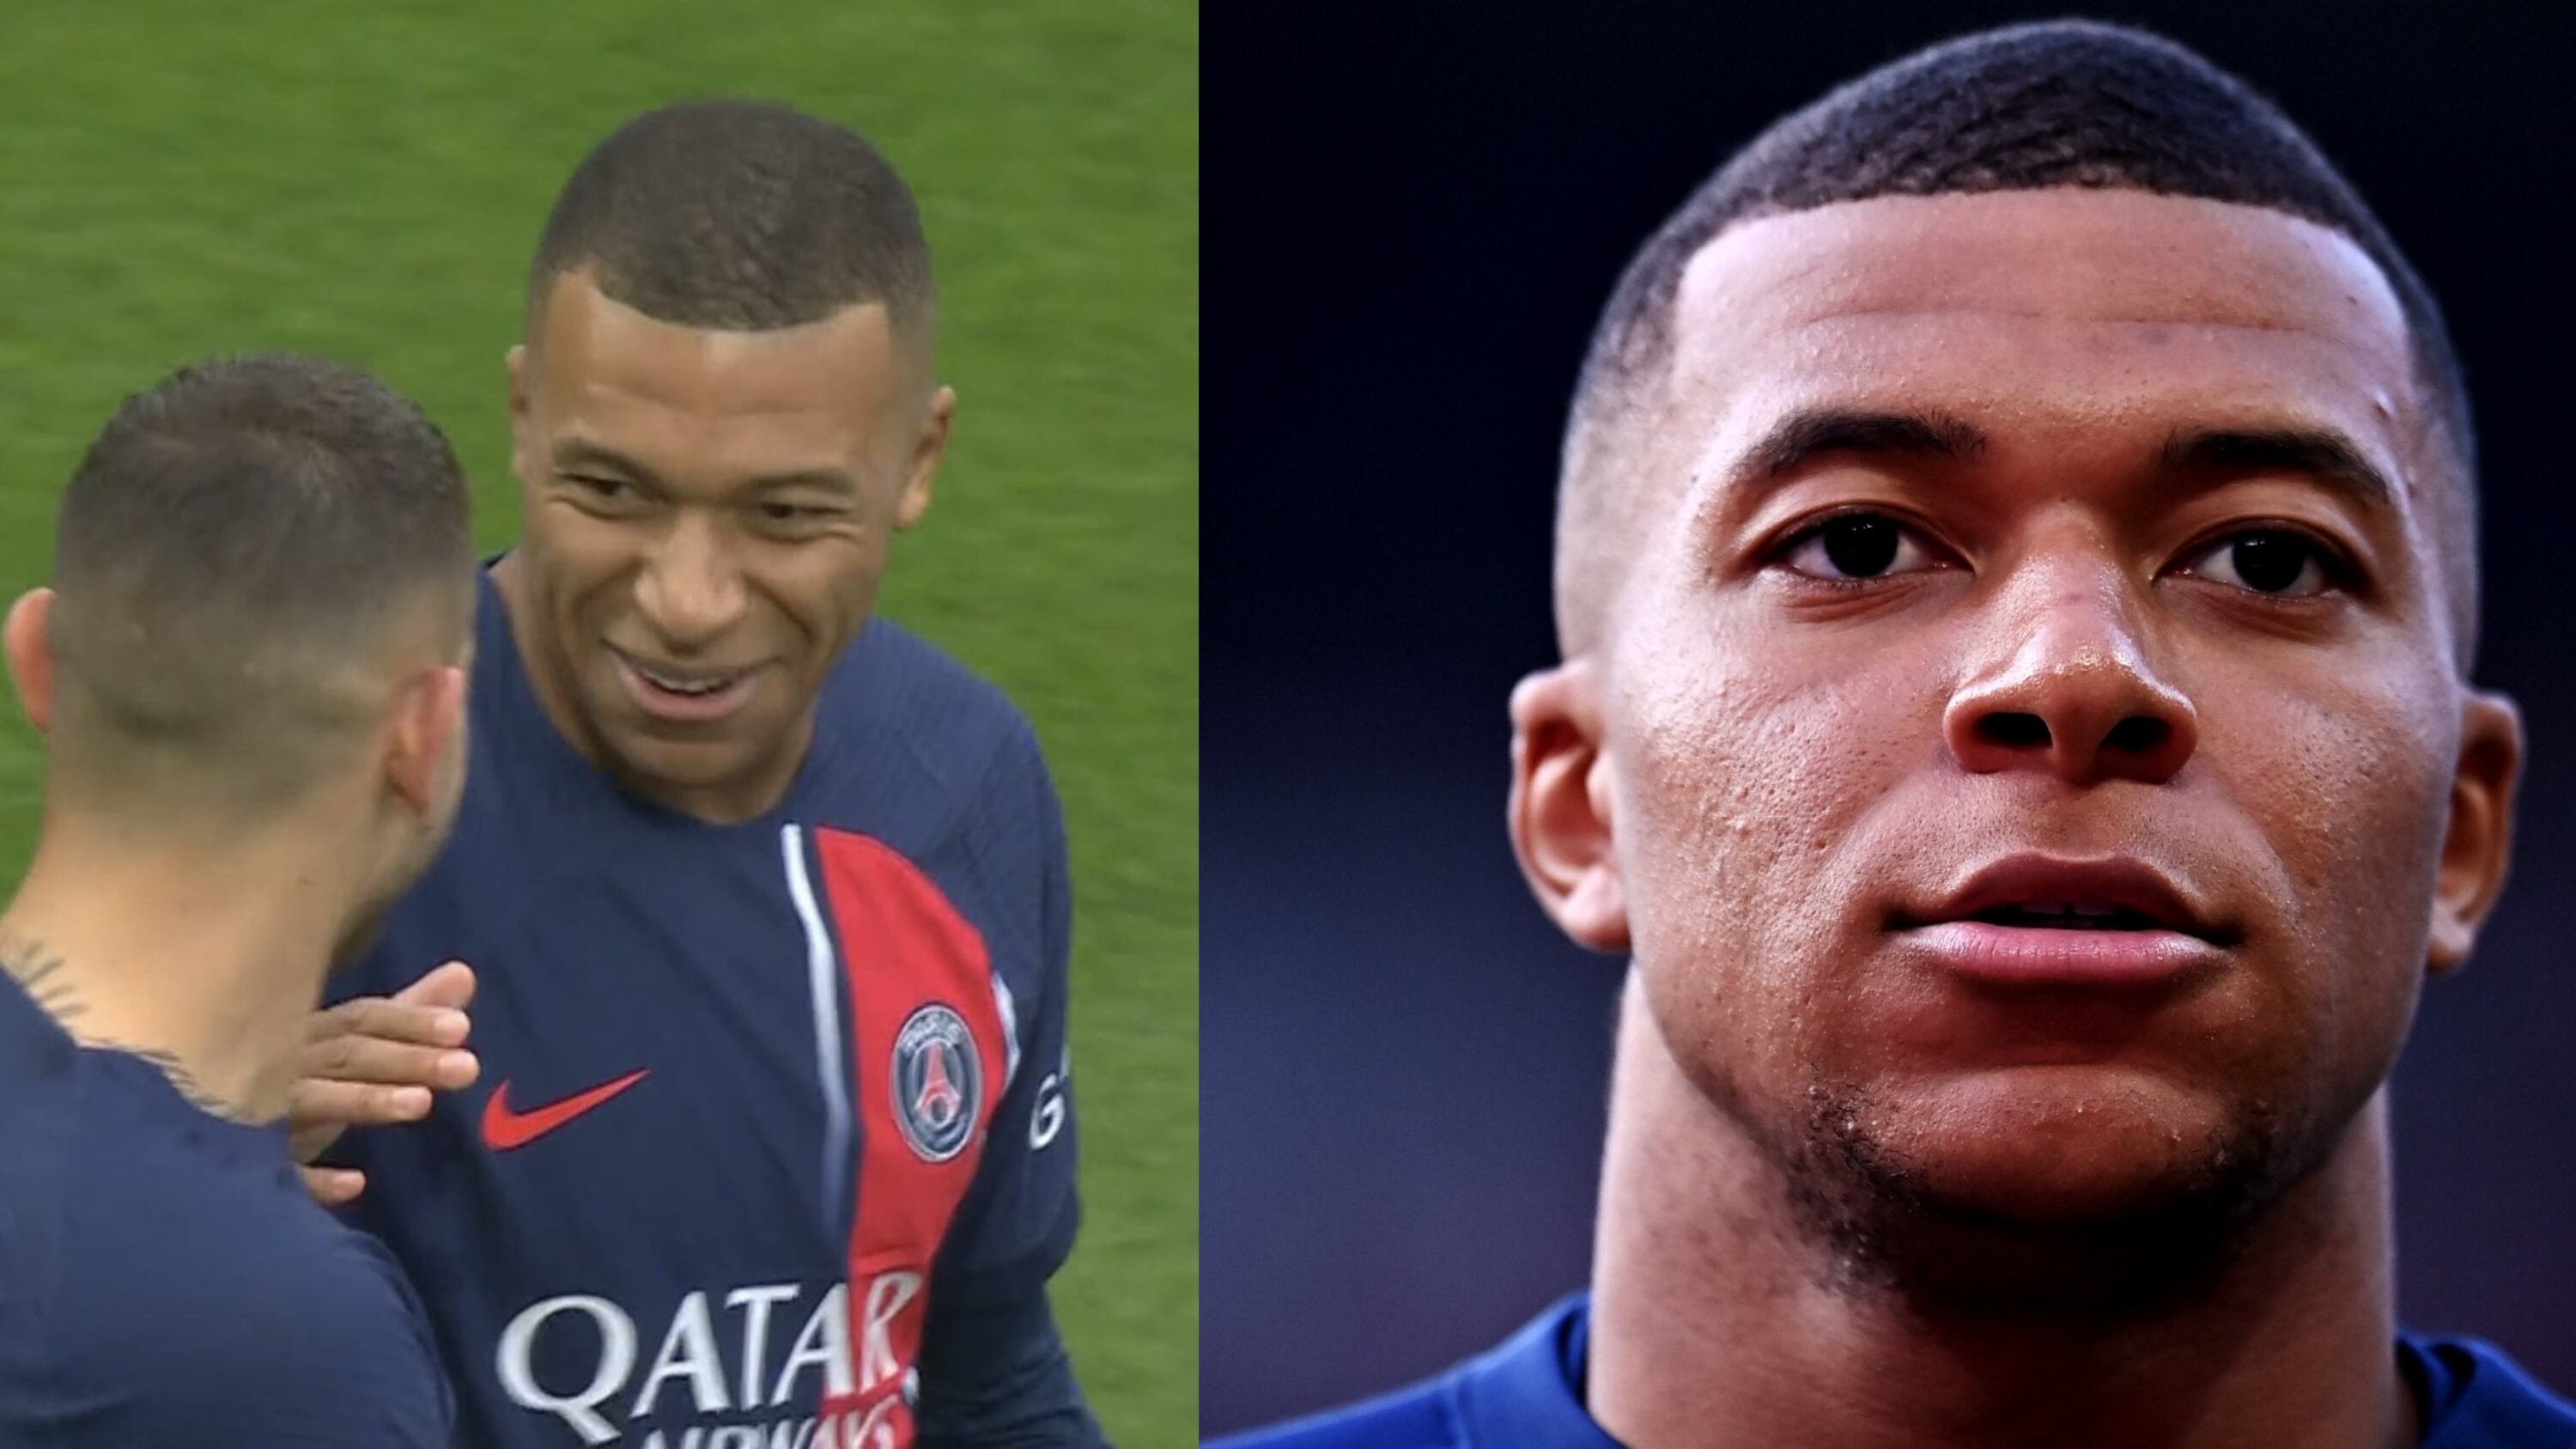 Drama once again, Mbappé gets into a controversy after talking about money